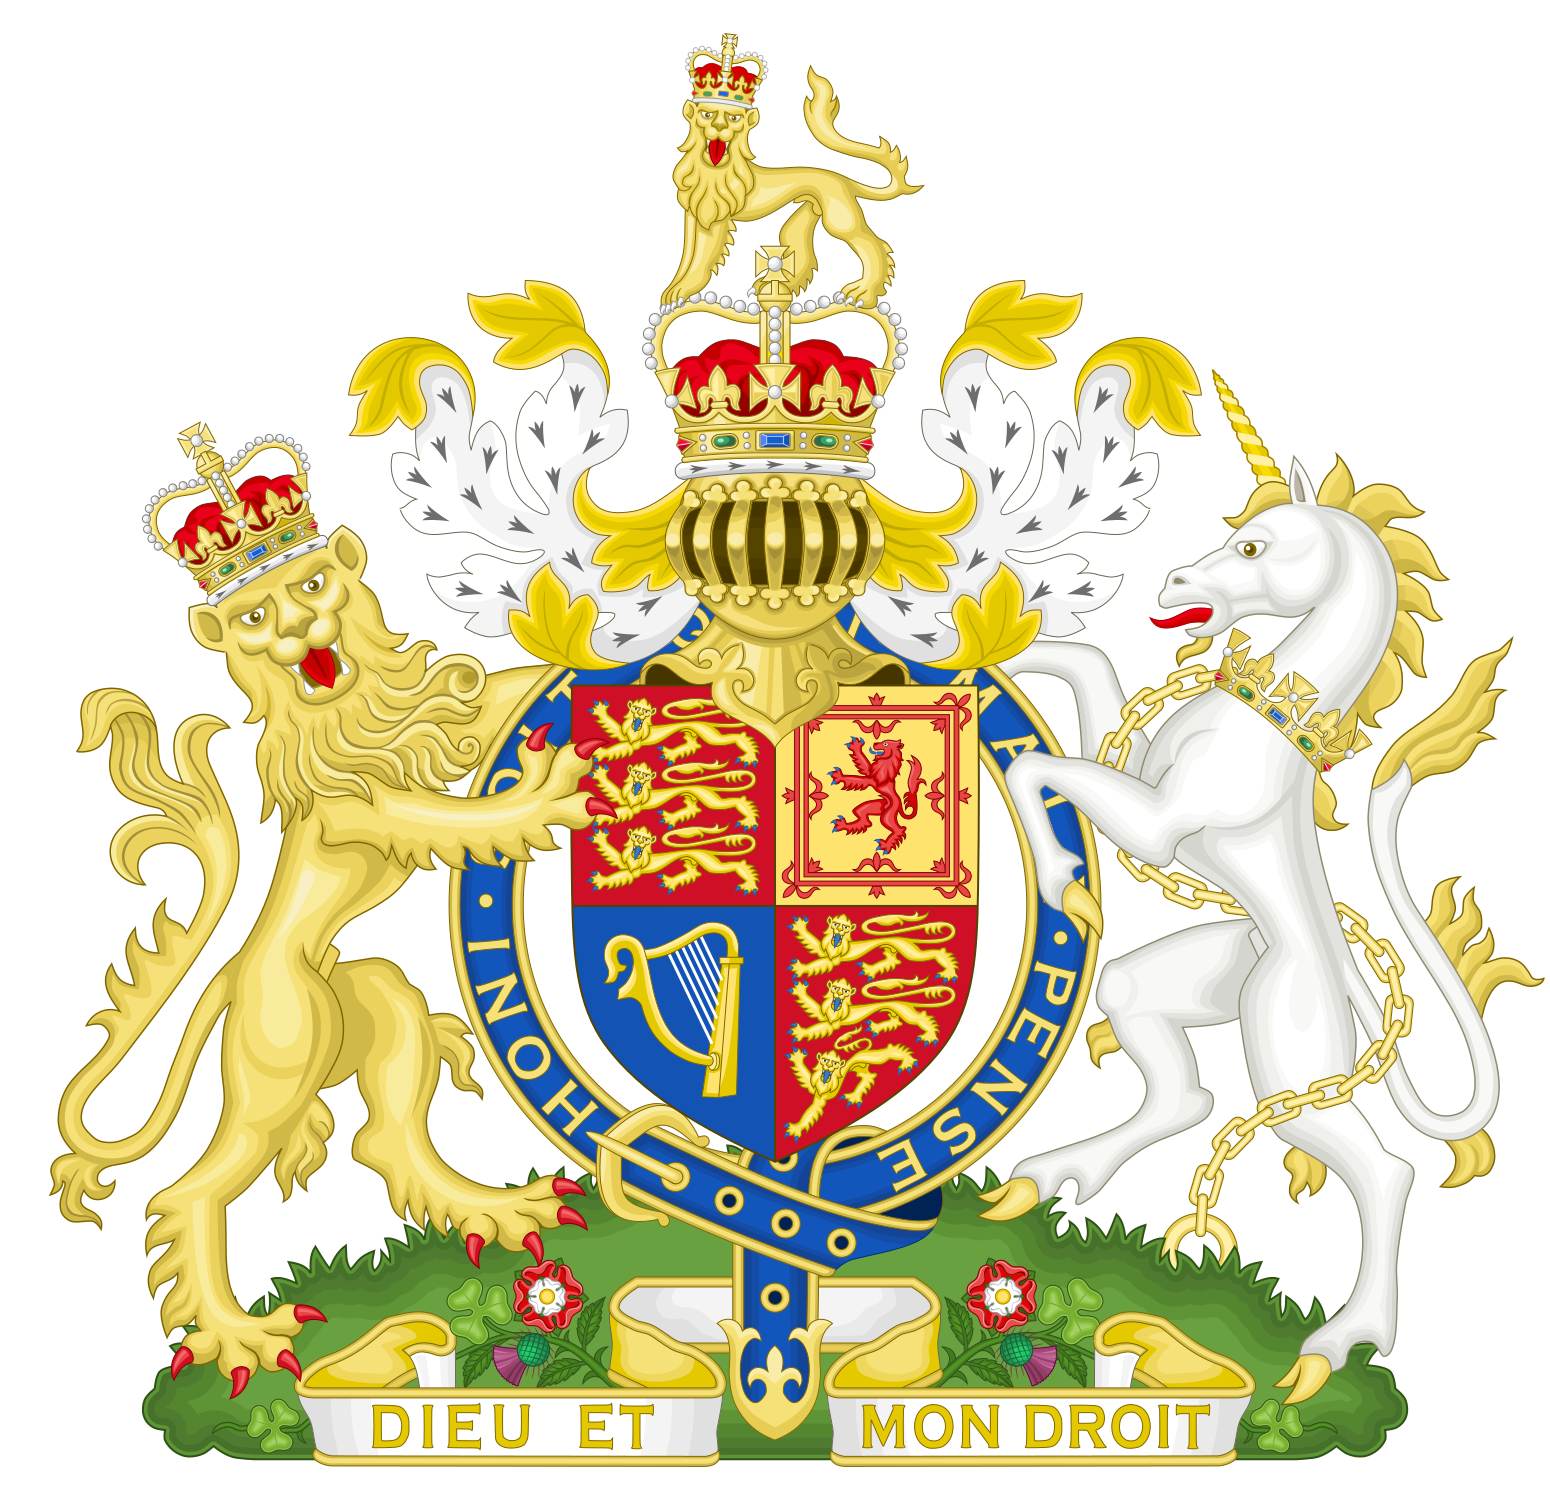 Royal Coat of Arms of the United Kingdom (St Edward's Crown).svg